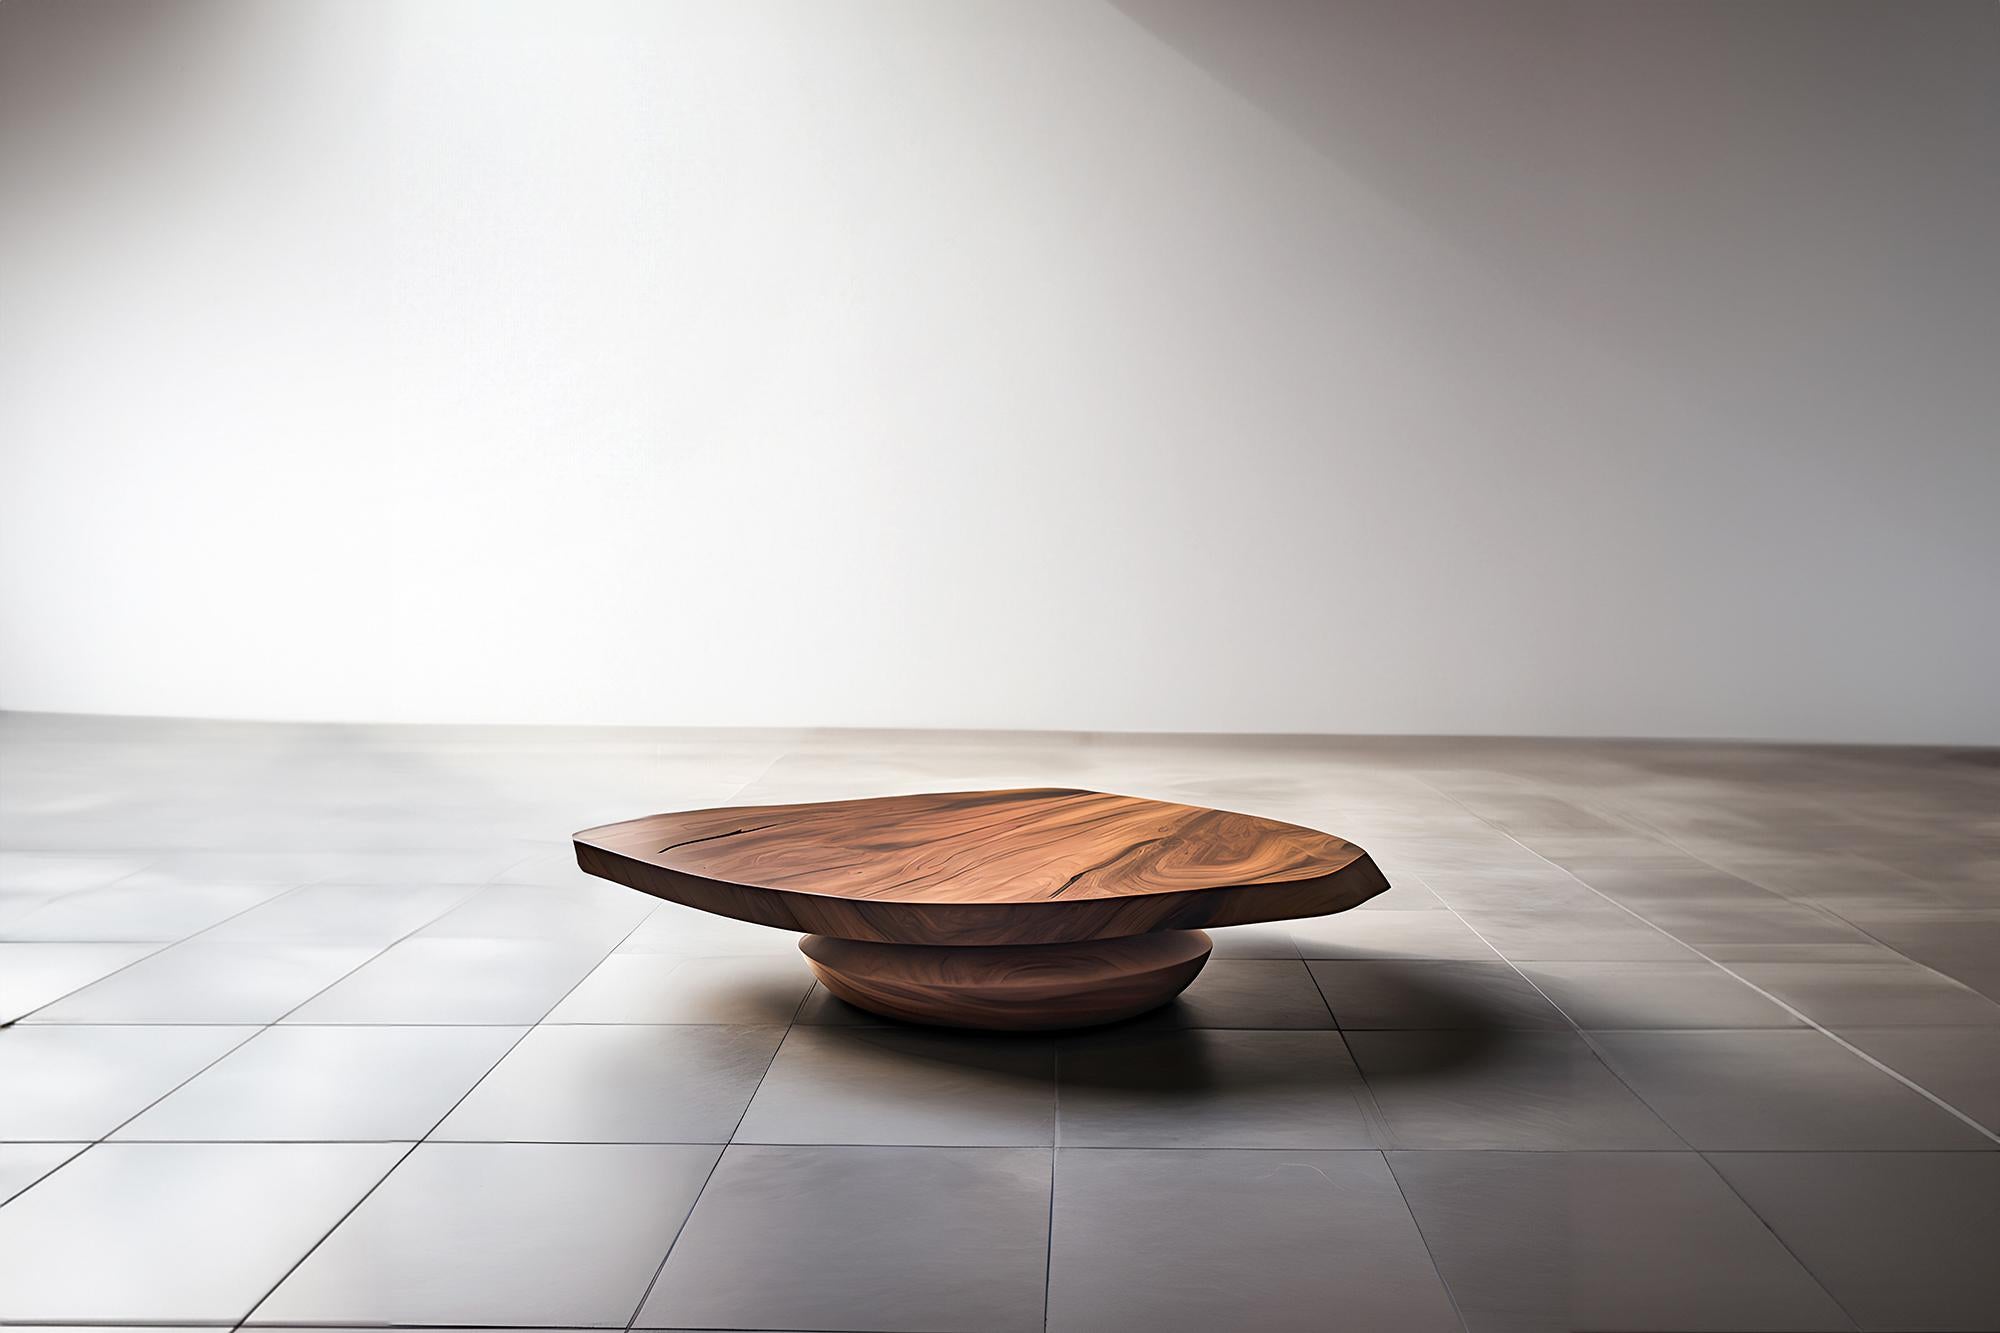 Sculptural Coffee Table Made of Solid Wood, Center Table Solace S50   by Joel Escalona


The Solace table series, designed by Joel Escalona, is a furniture collection that exudes balance and presence, thanks to its sensuous, dense, and irregular